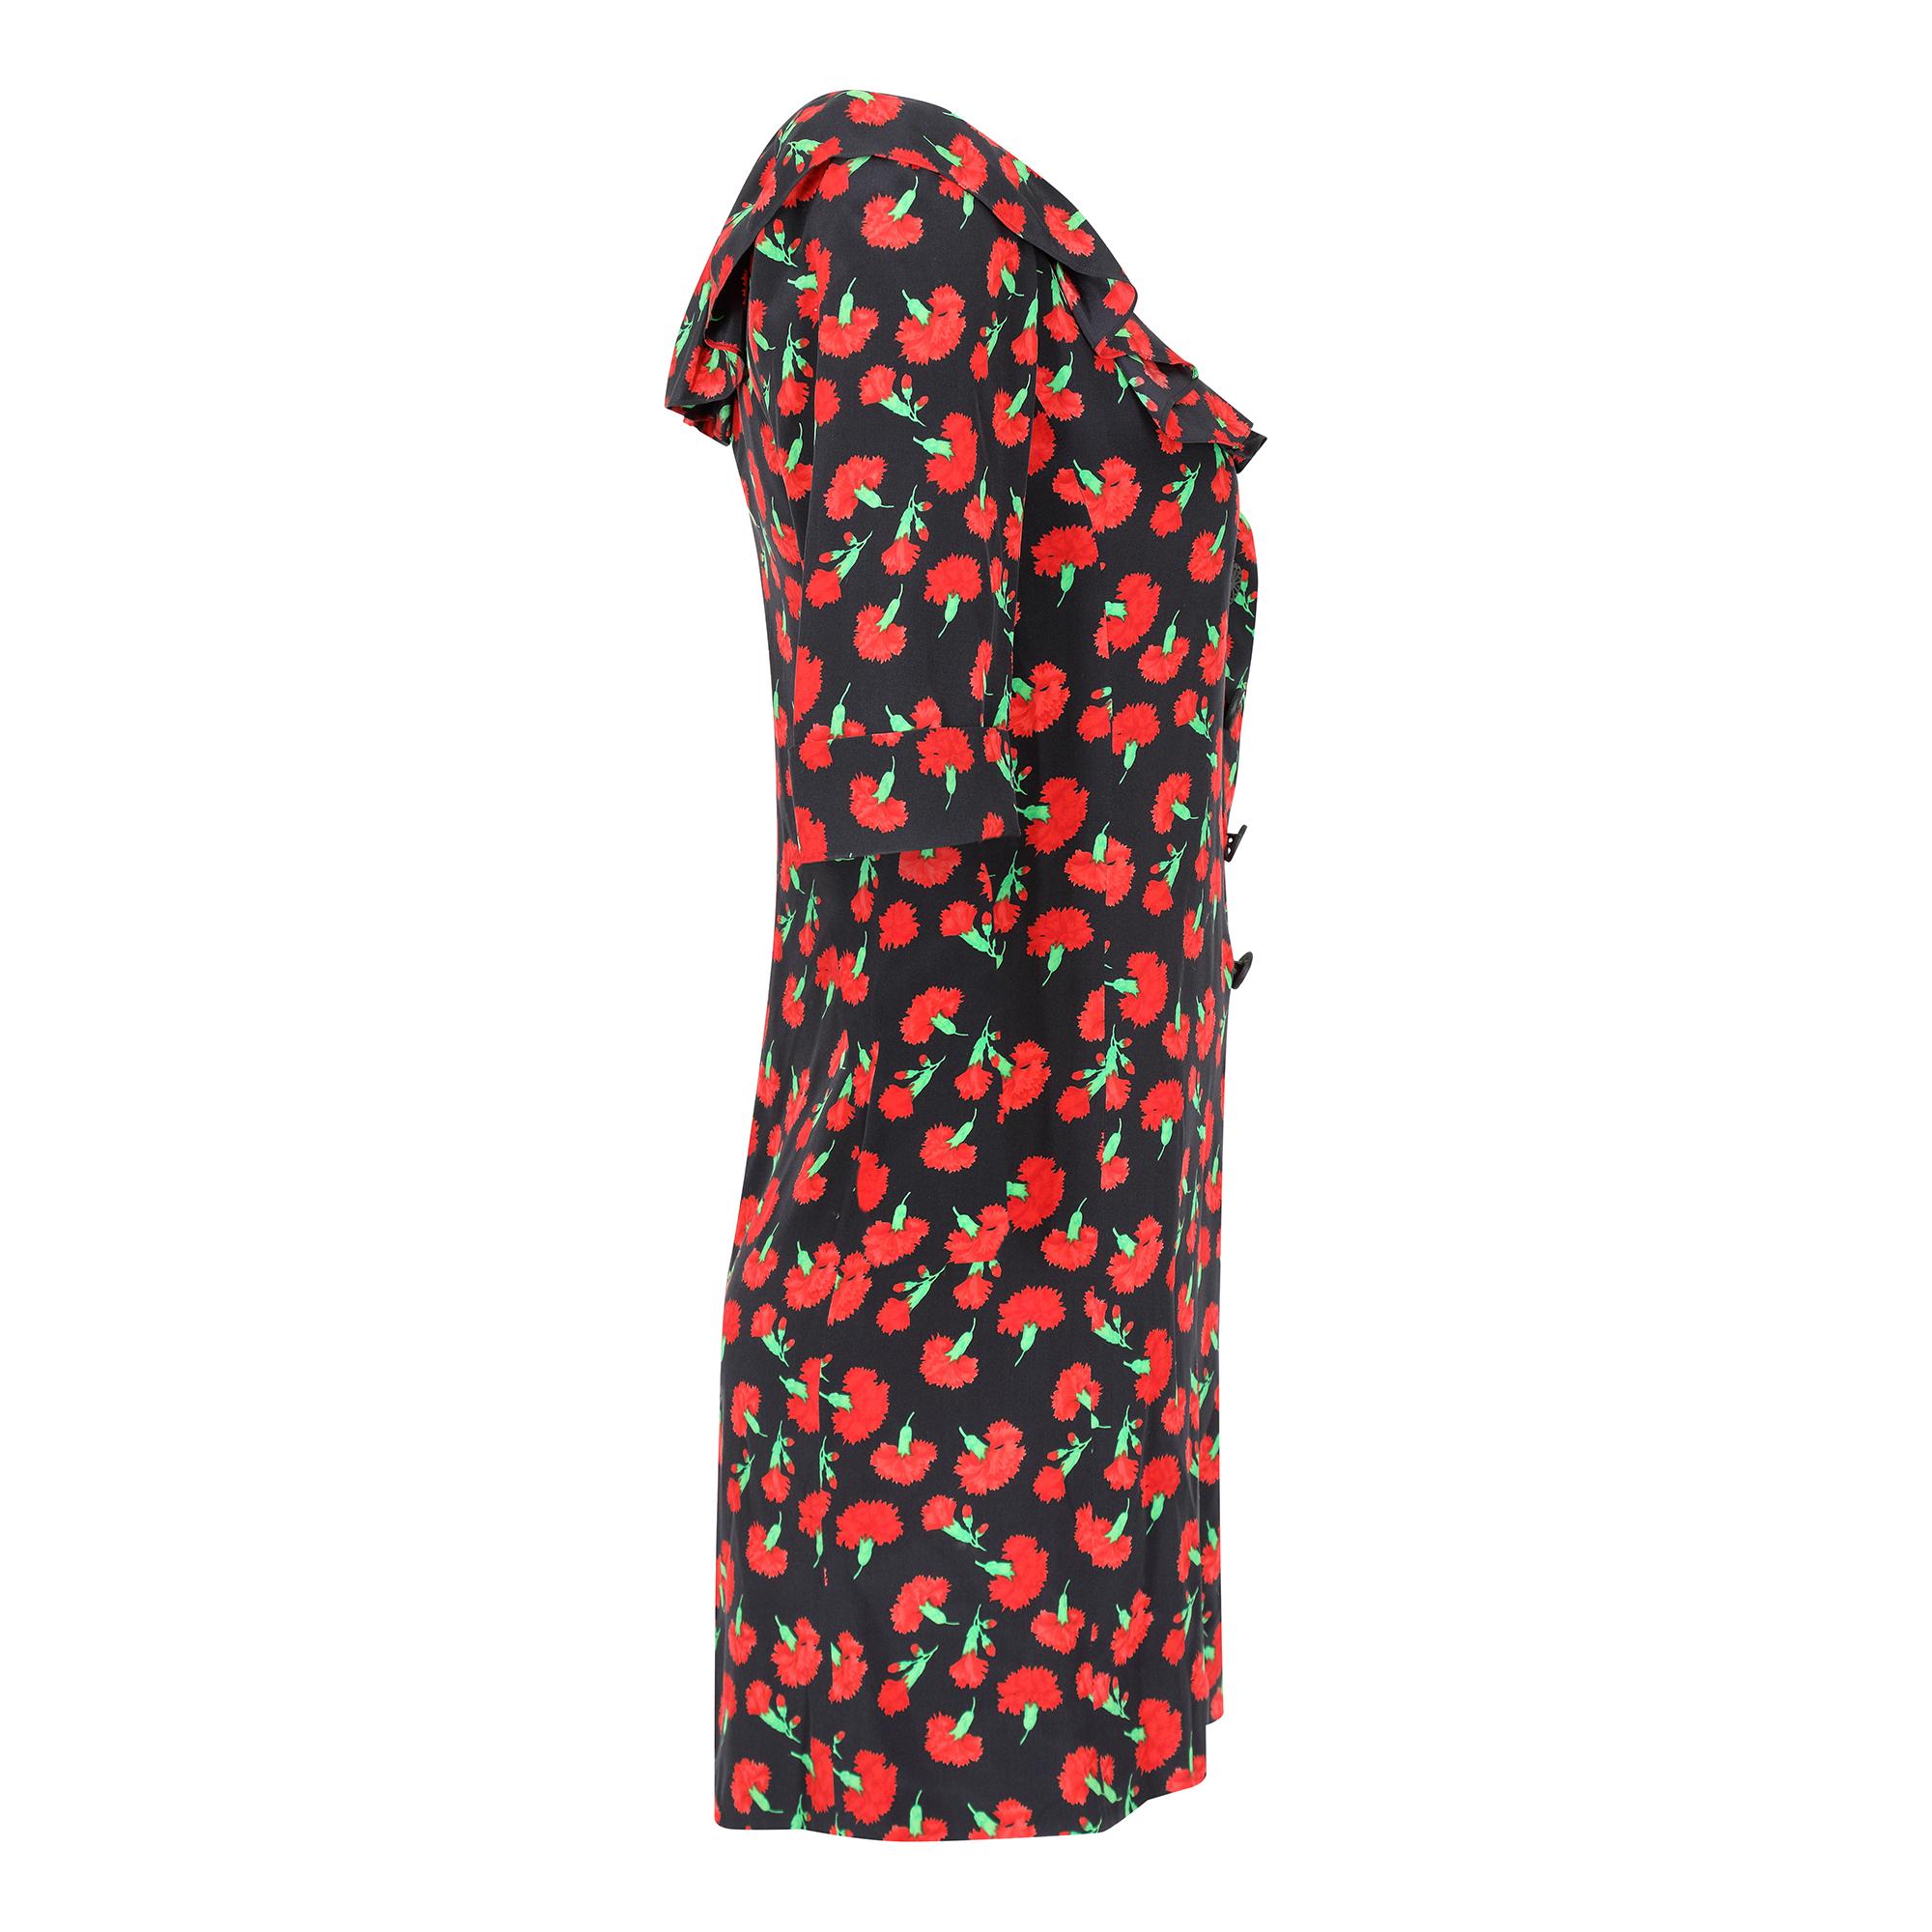 A notable dress from a design icon, Yves Saint Laurent, when he was still at the helm of his eponymous fashion house.  This dress has its origins in the autumn/winter 94 - 95  ready to wear collection where this black and red carnation print was the